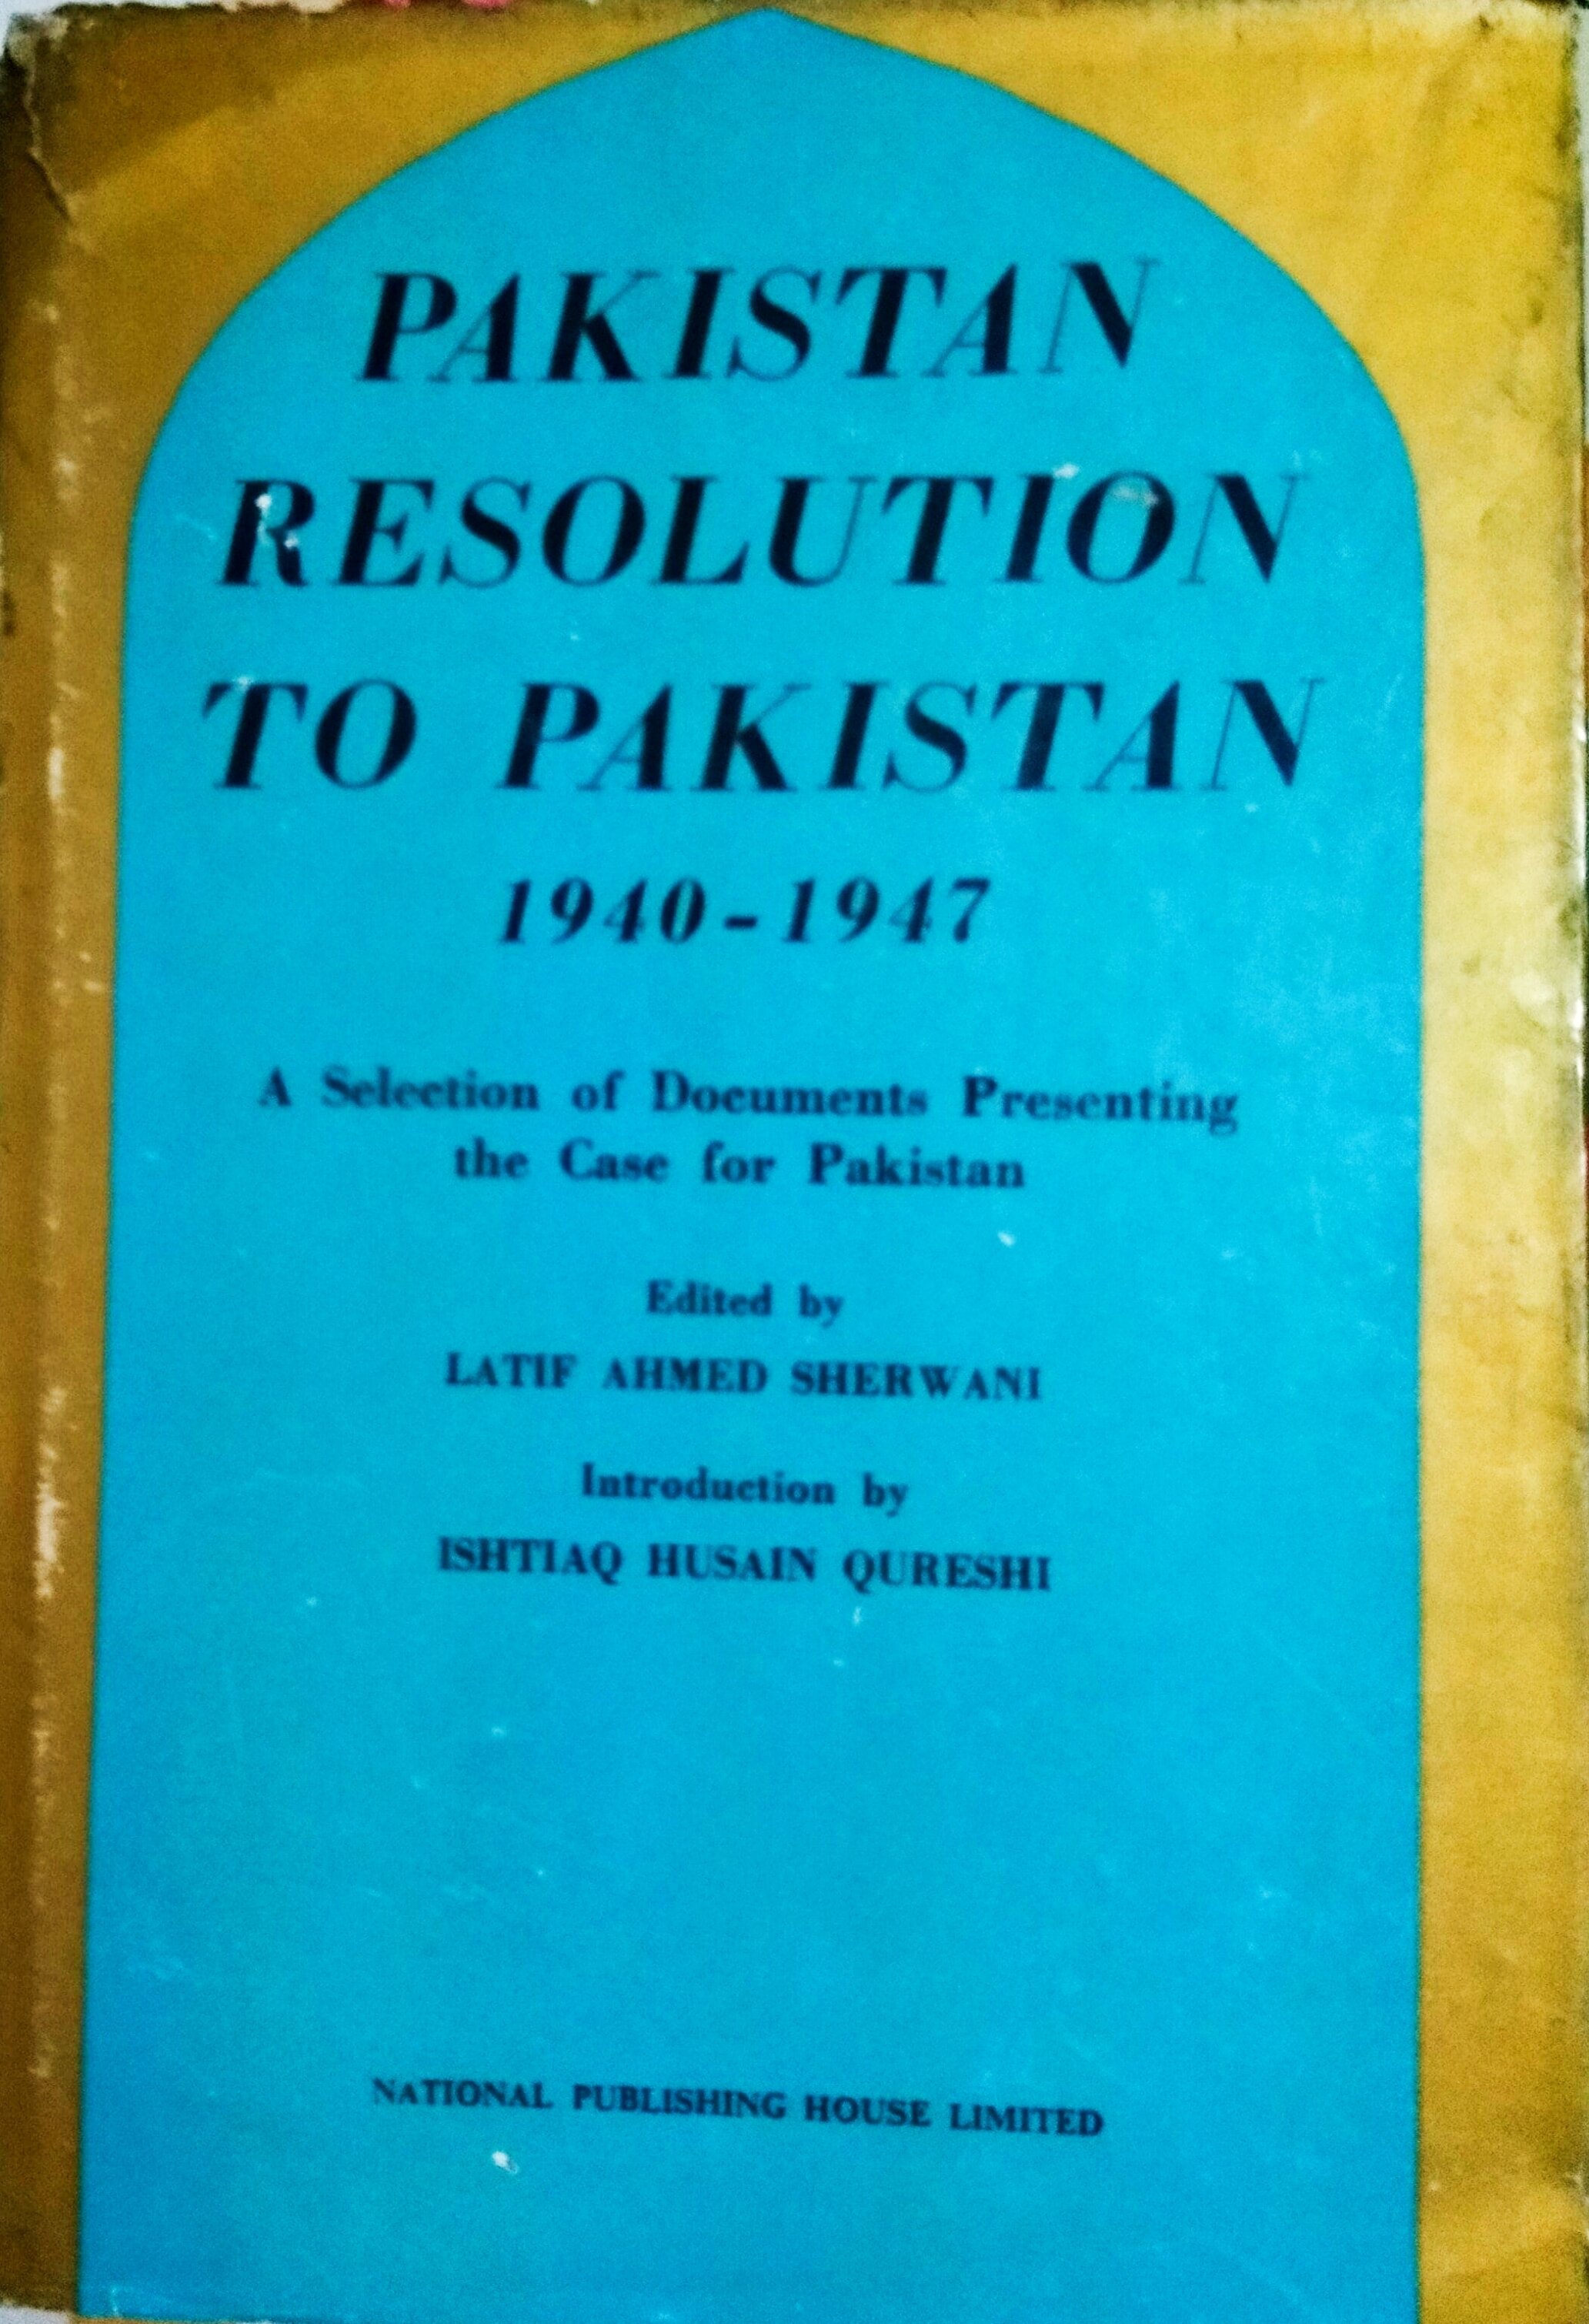 pakistan resolution to pakistan 1940-47: a selection of documents presenting the case for pakistan